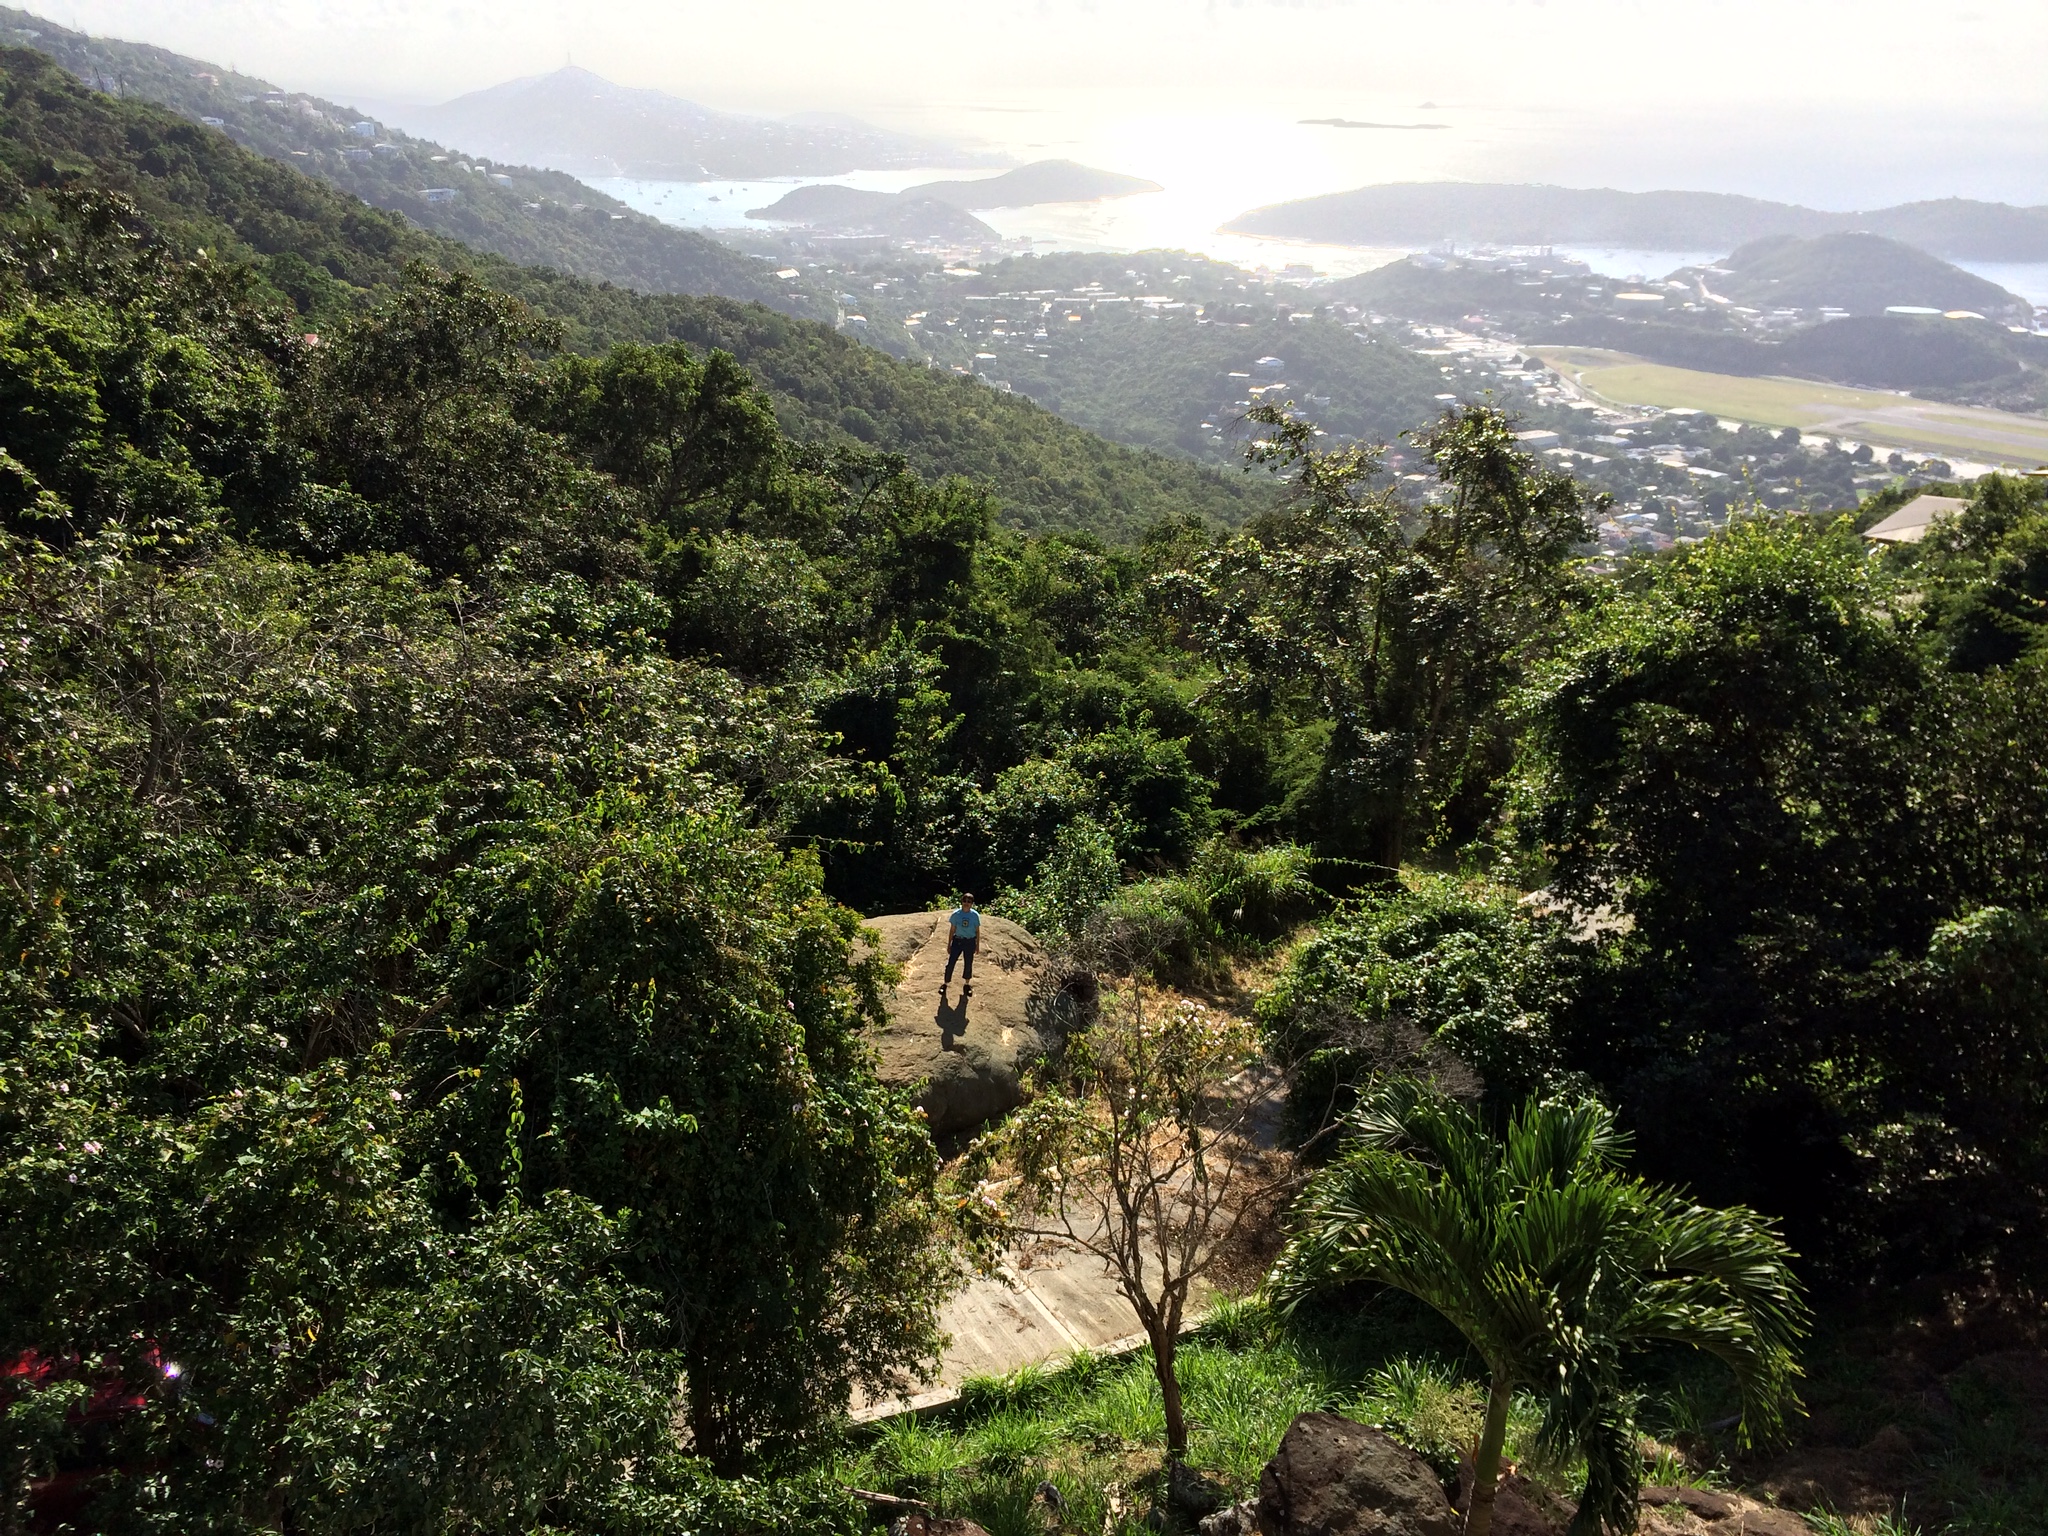 View of a tropical hillside with the sea in the distance.